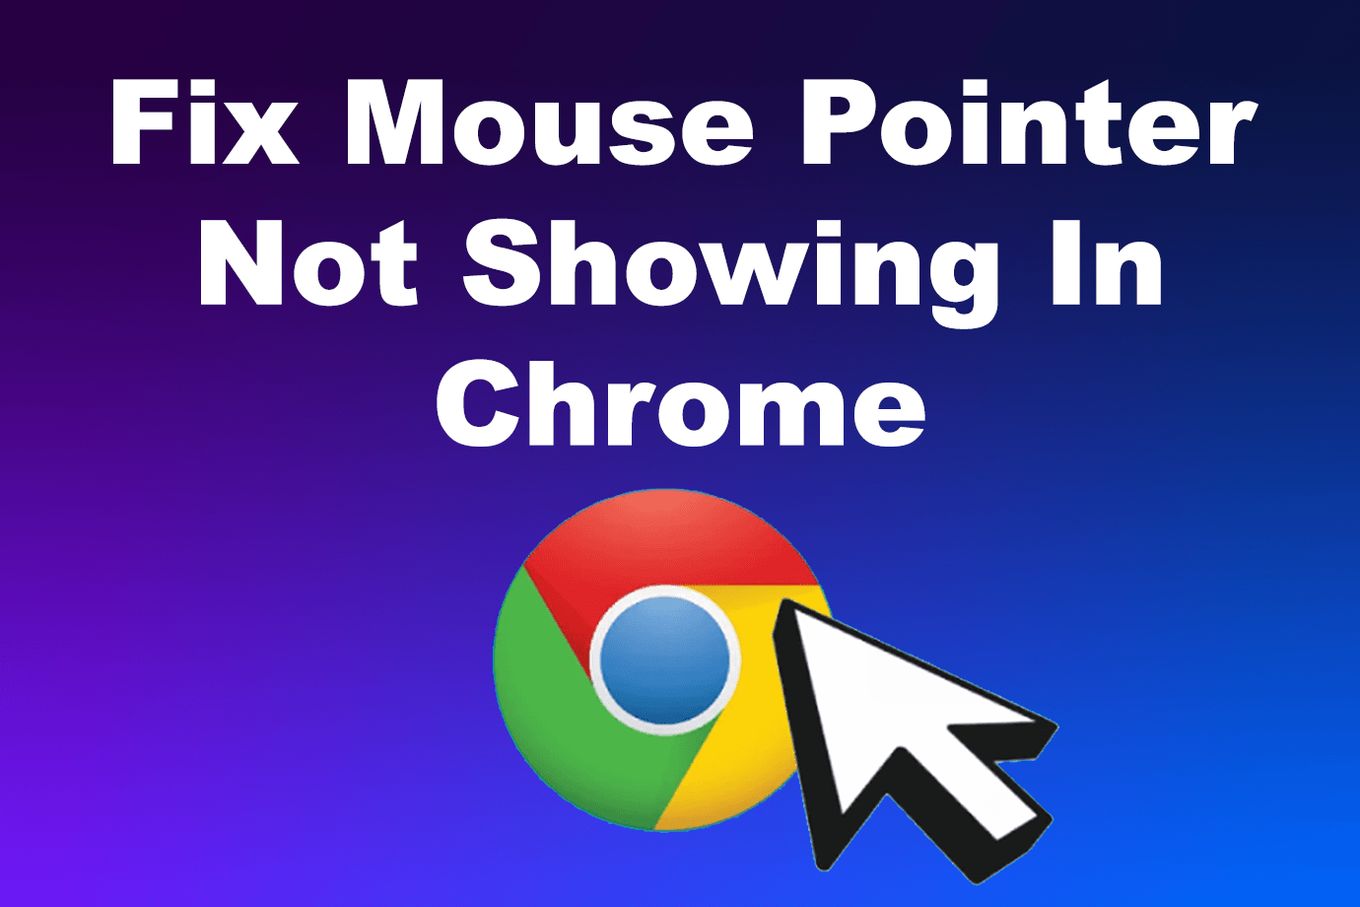 How to setup custom cursor in chrome browser? Search On google Google Web  Store Search on Google Web Store Custom Cursor Go to Chrome Web Store.  Click here to go to official